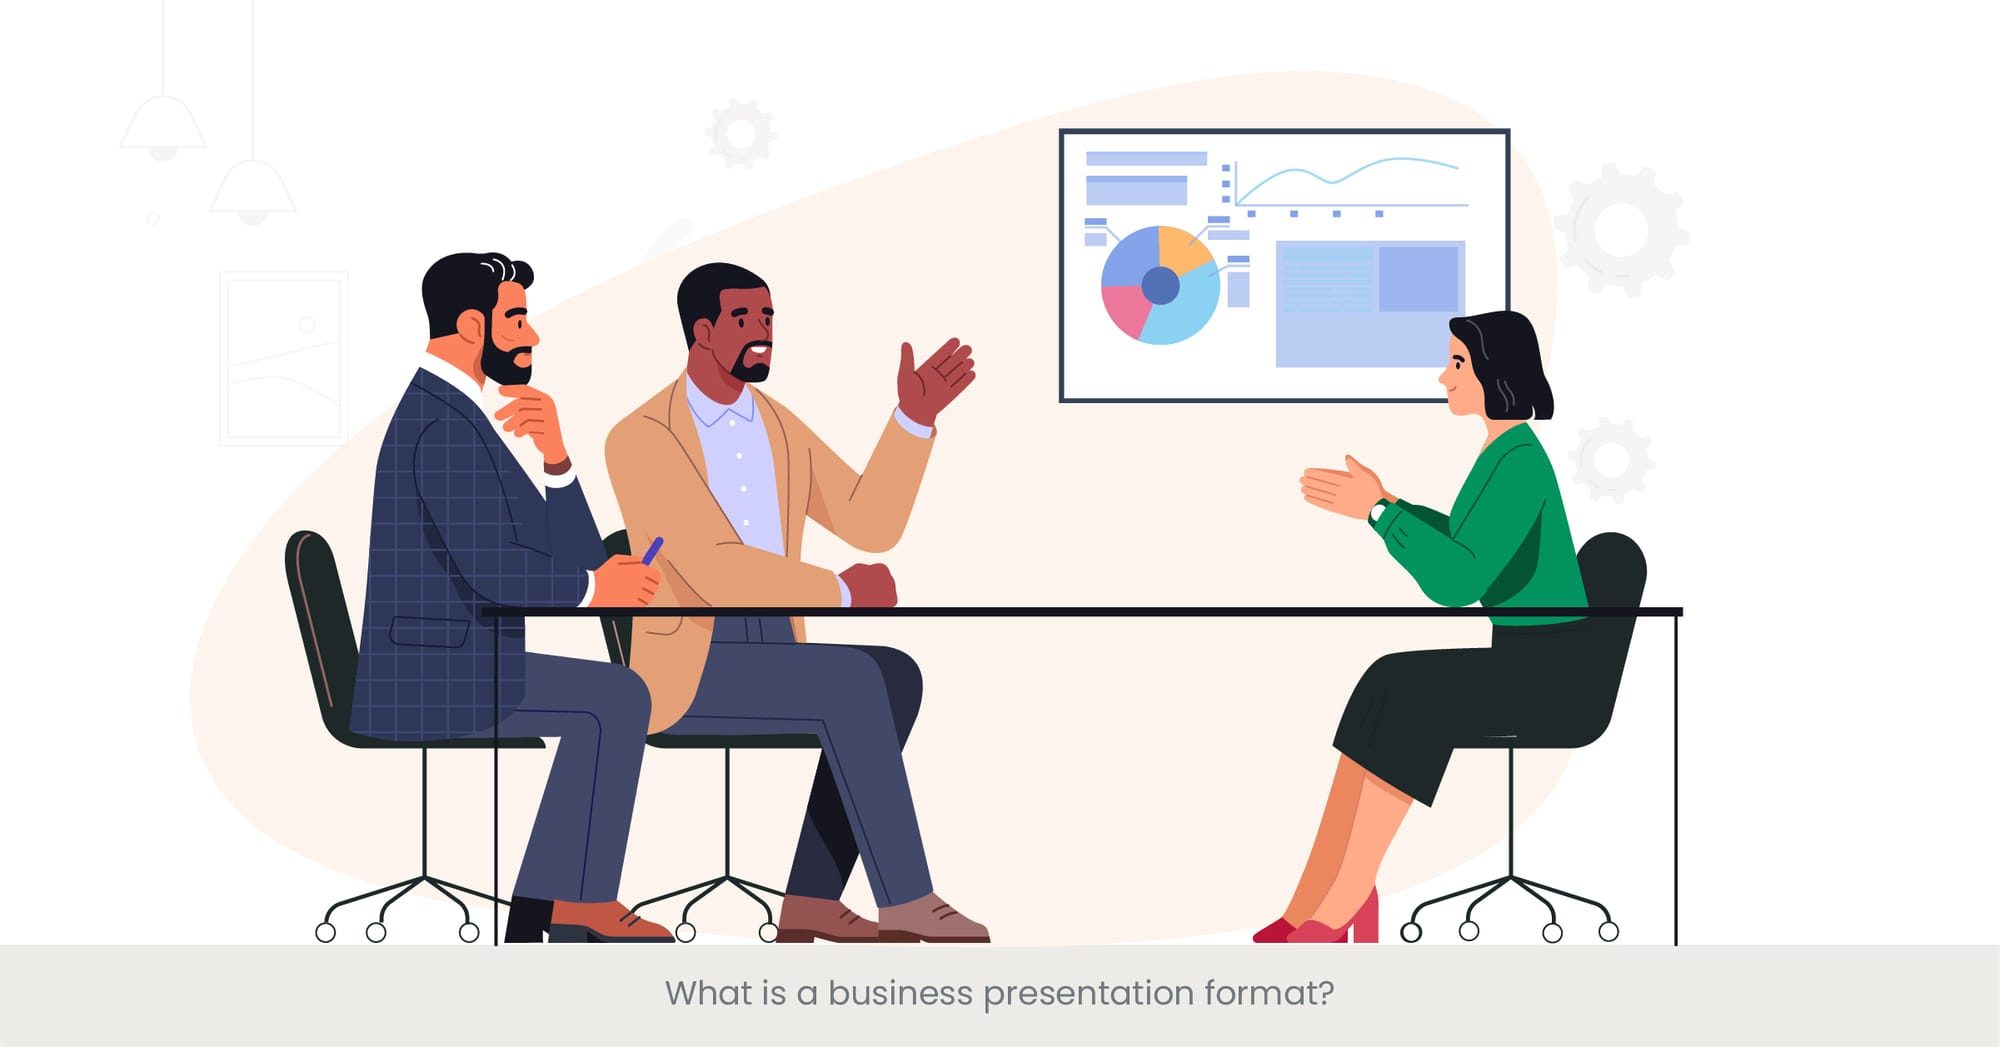   What is a business presentation format